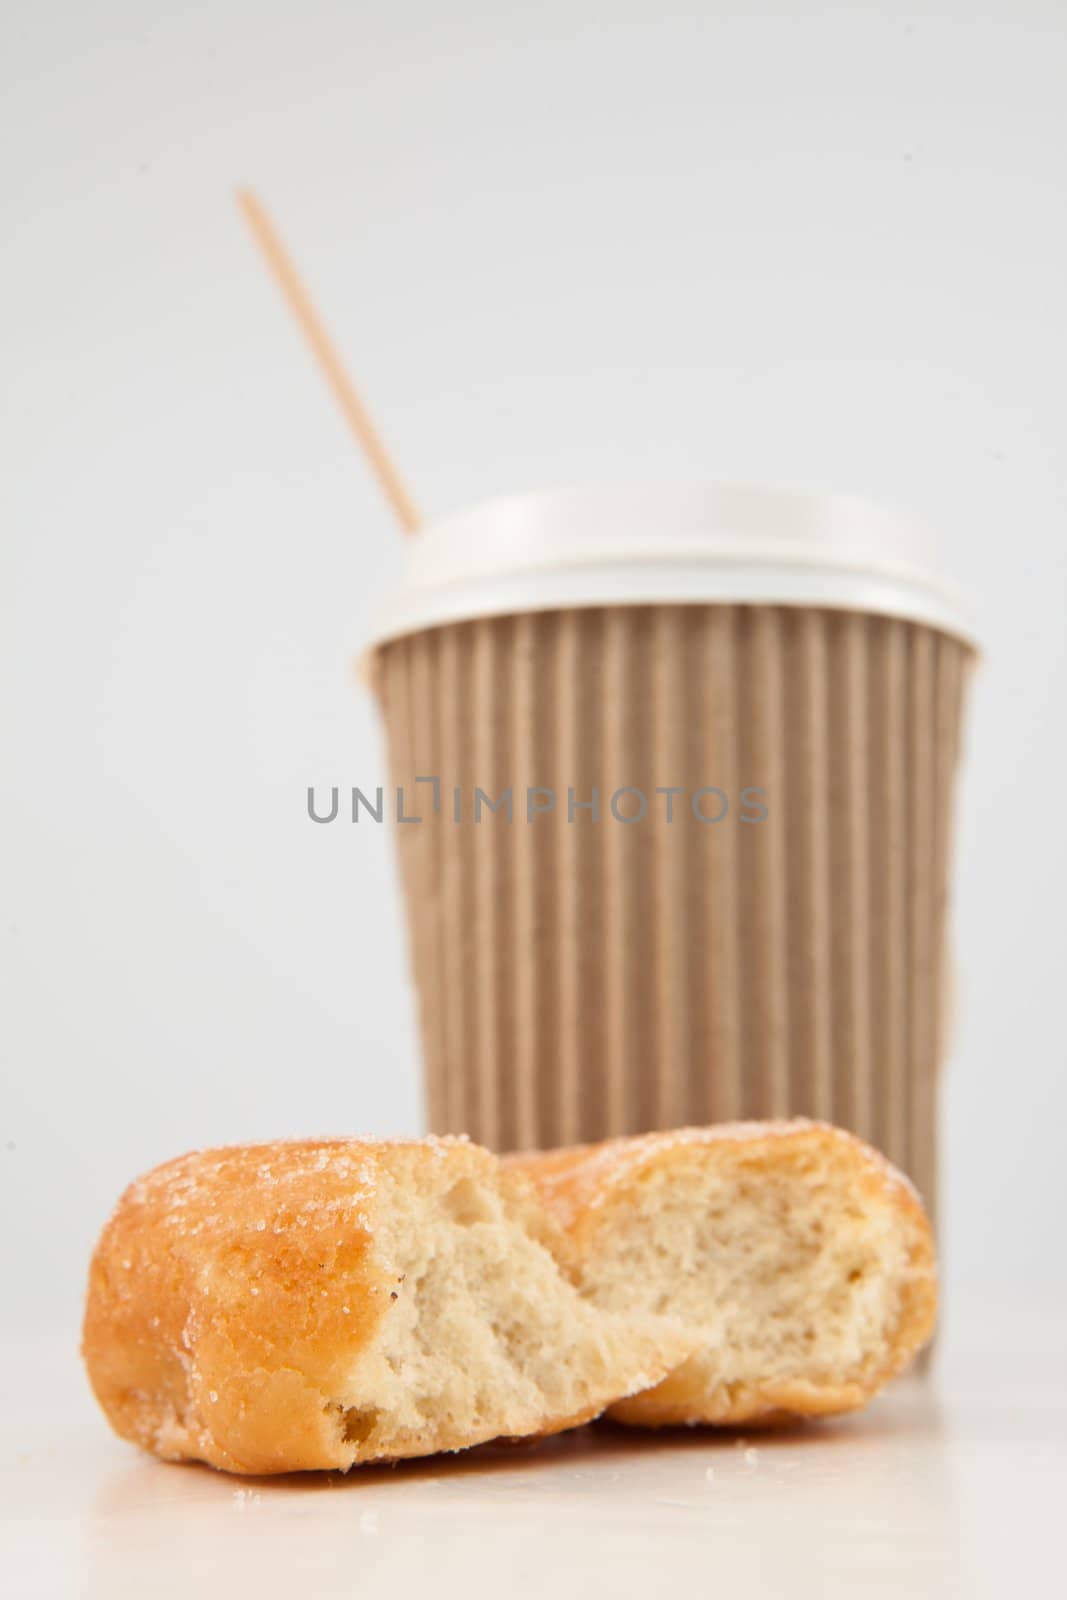 An half eaten doughnut and a cup of tea placed together against a white background